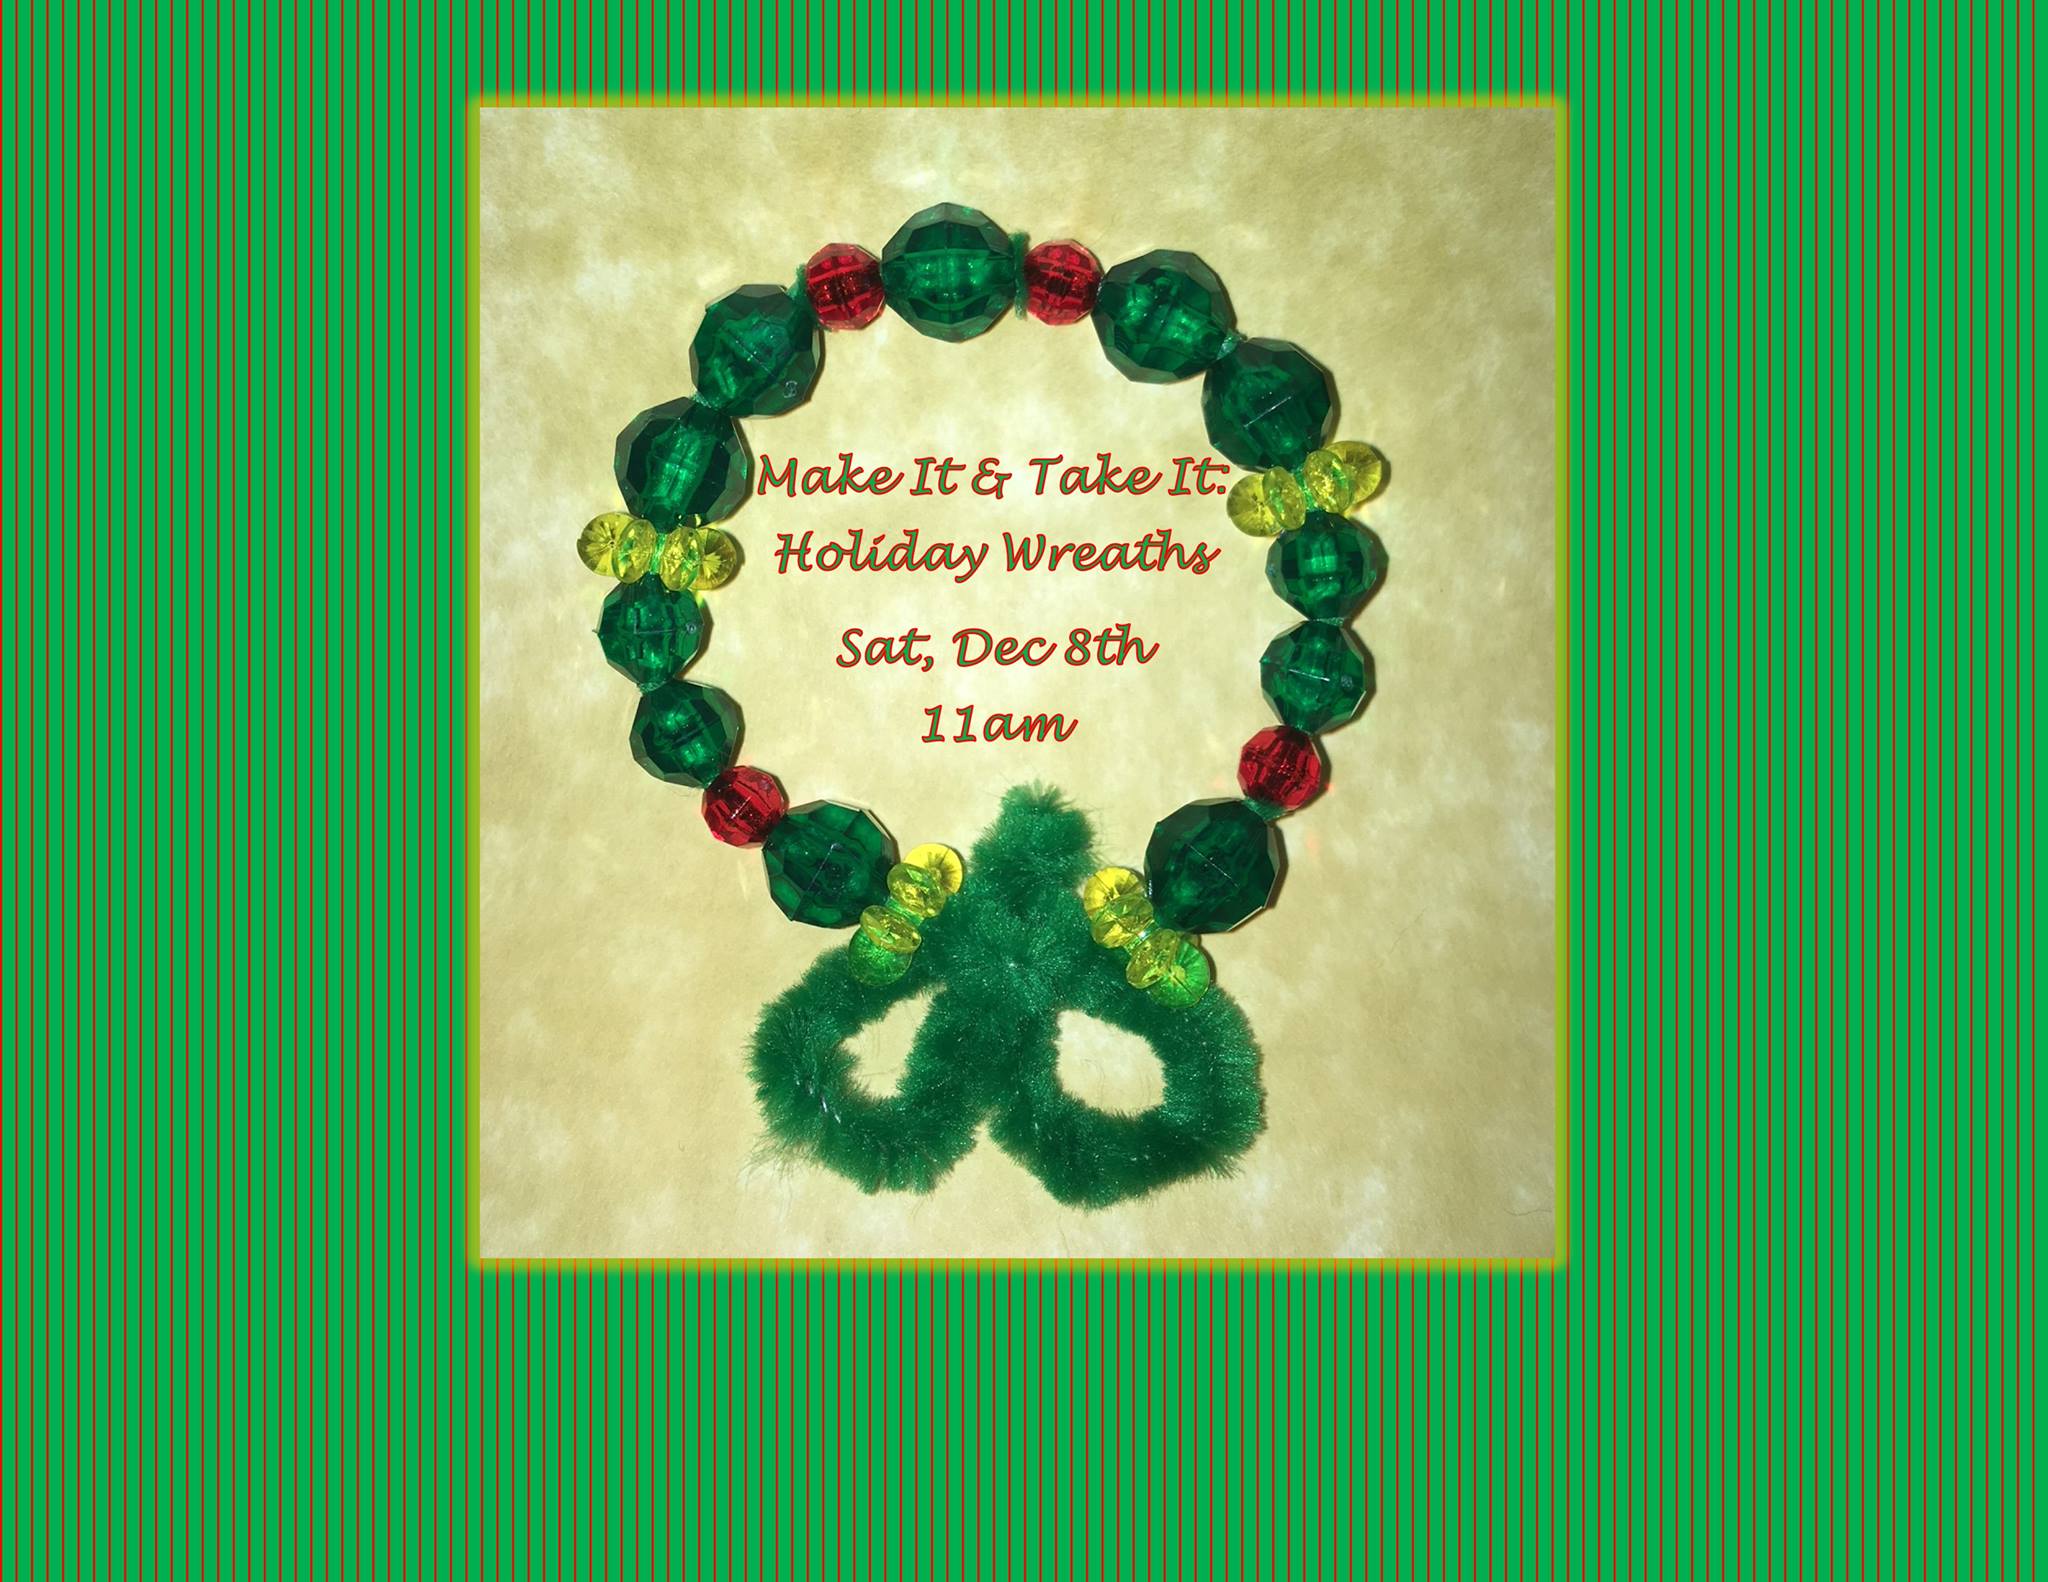 Picture of a wreath made from green and red beads